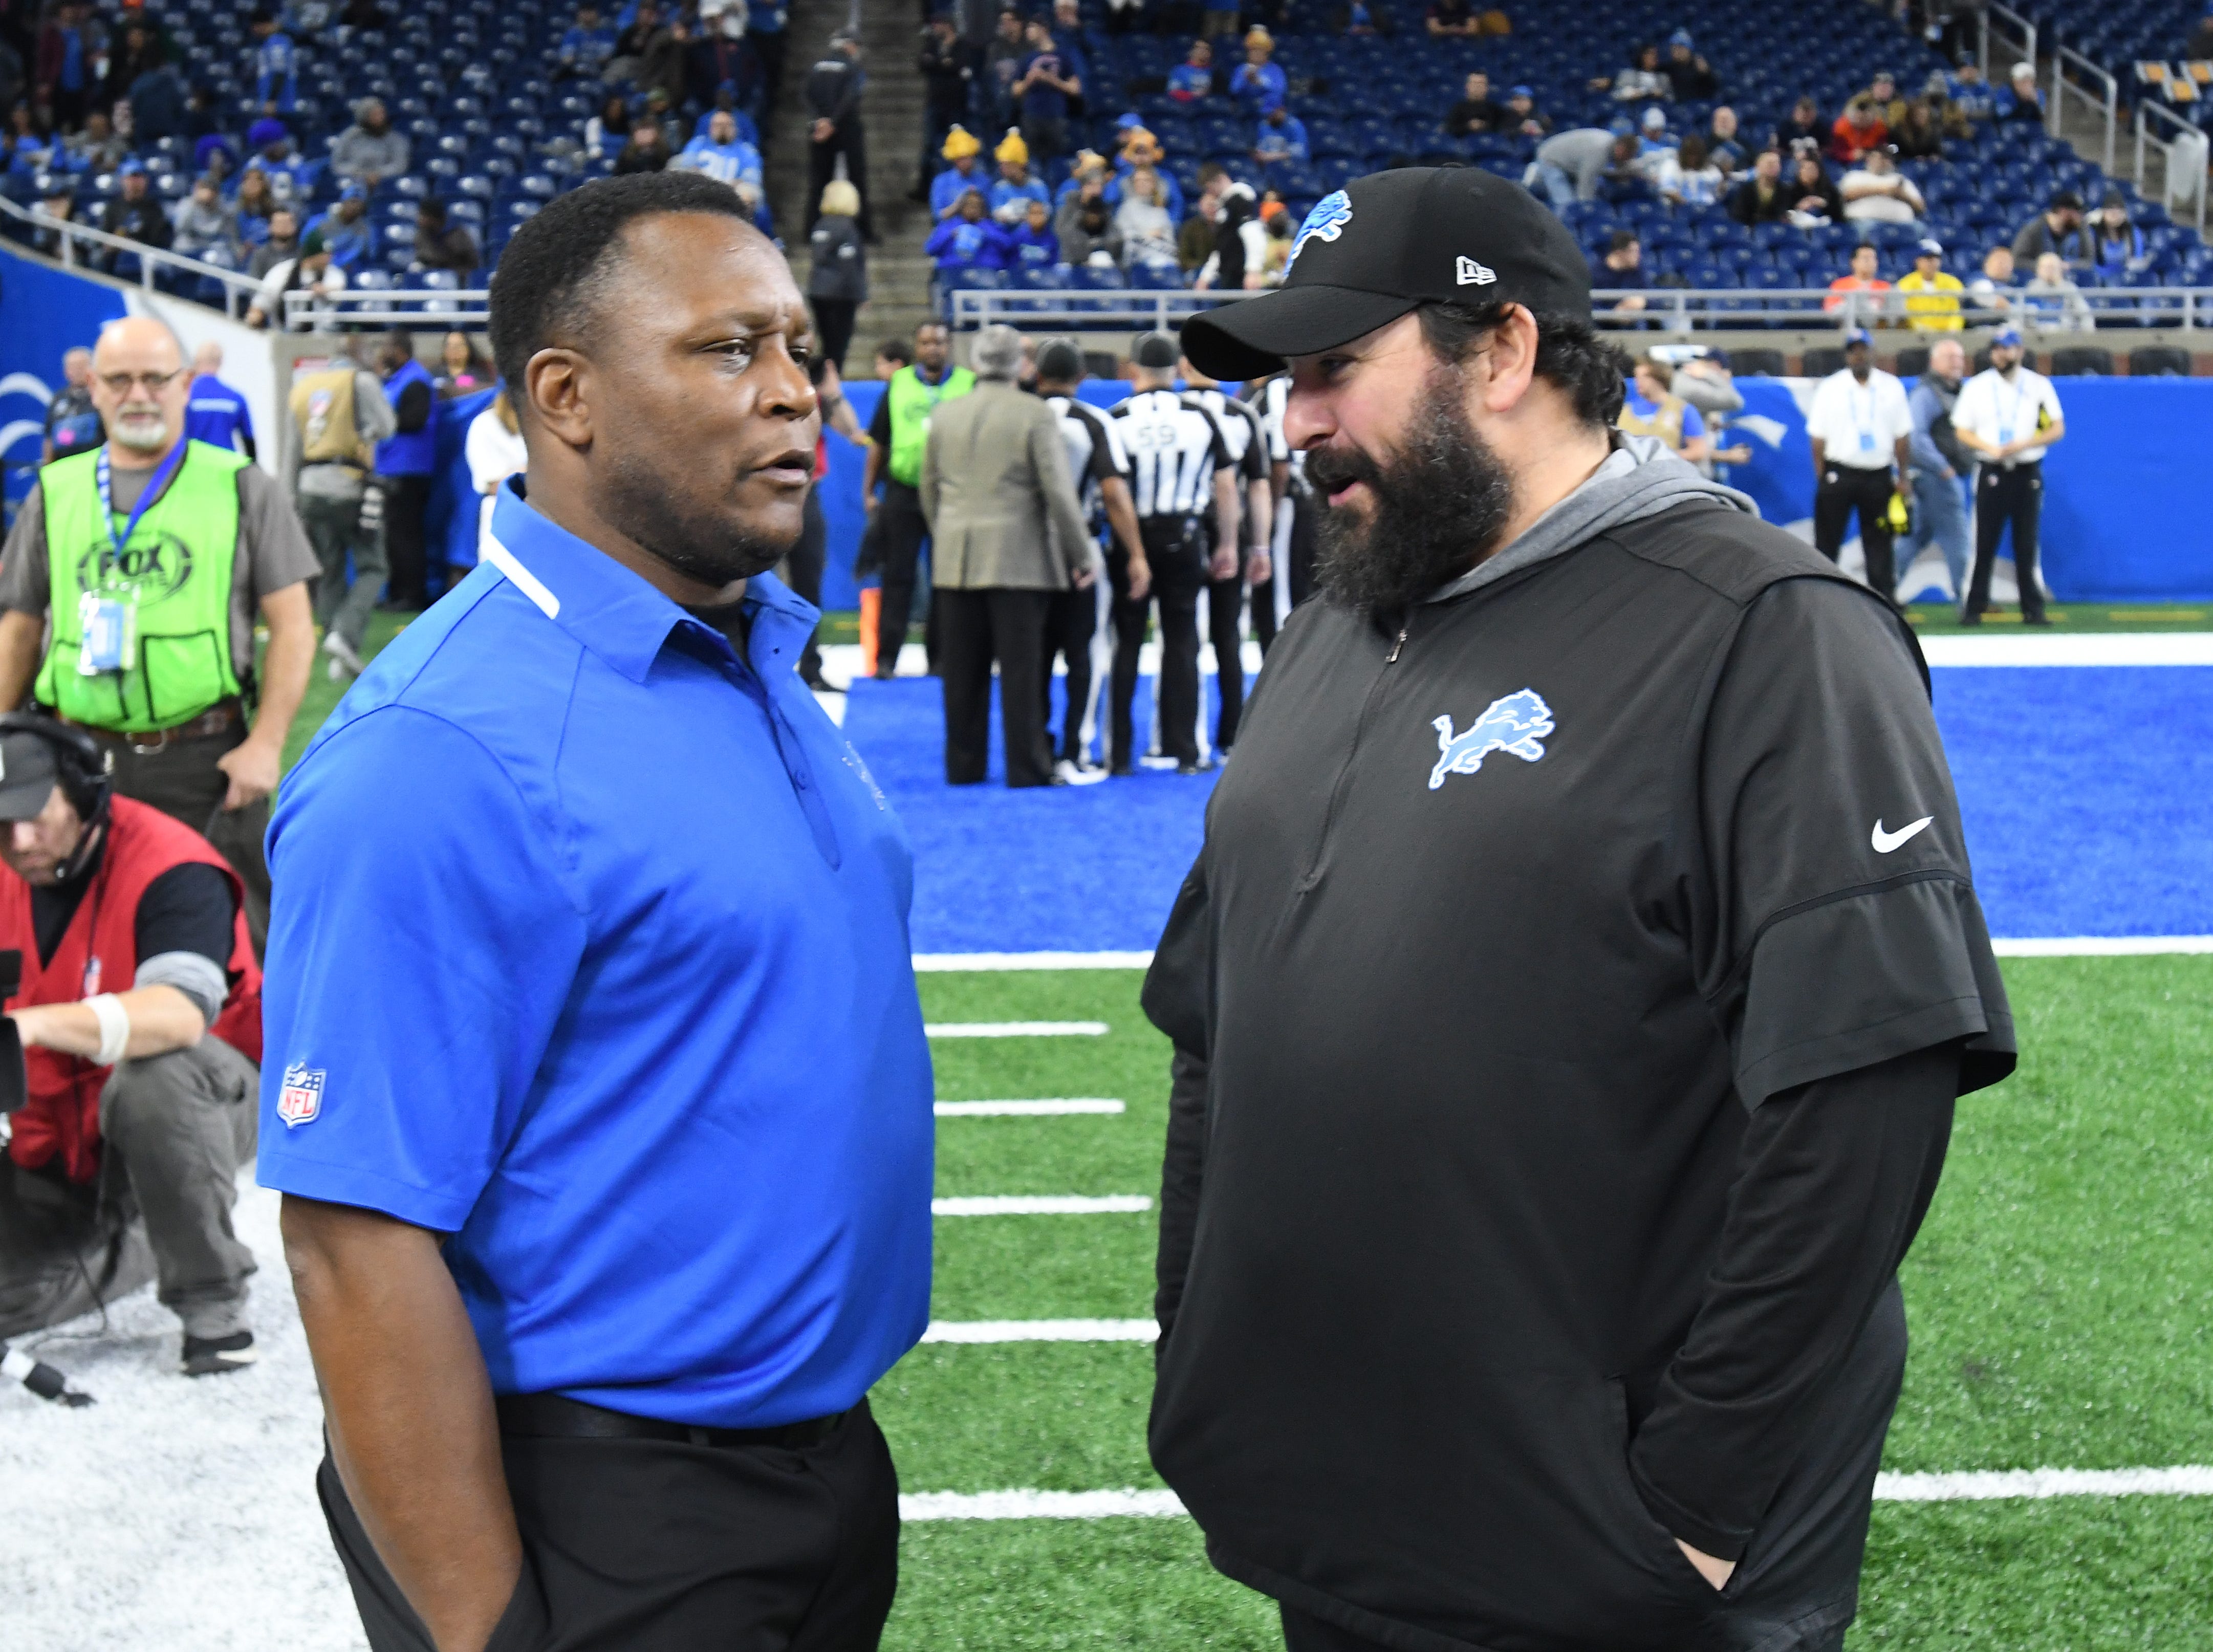 NFL Hall of Fame running back Barry Sanders chats with Lions head coach Matt Patricia before the game against the Chicago Bears on November 28, 2019.